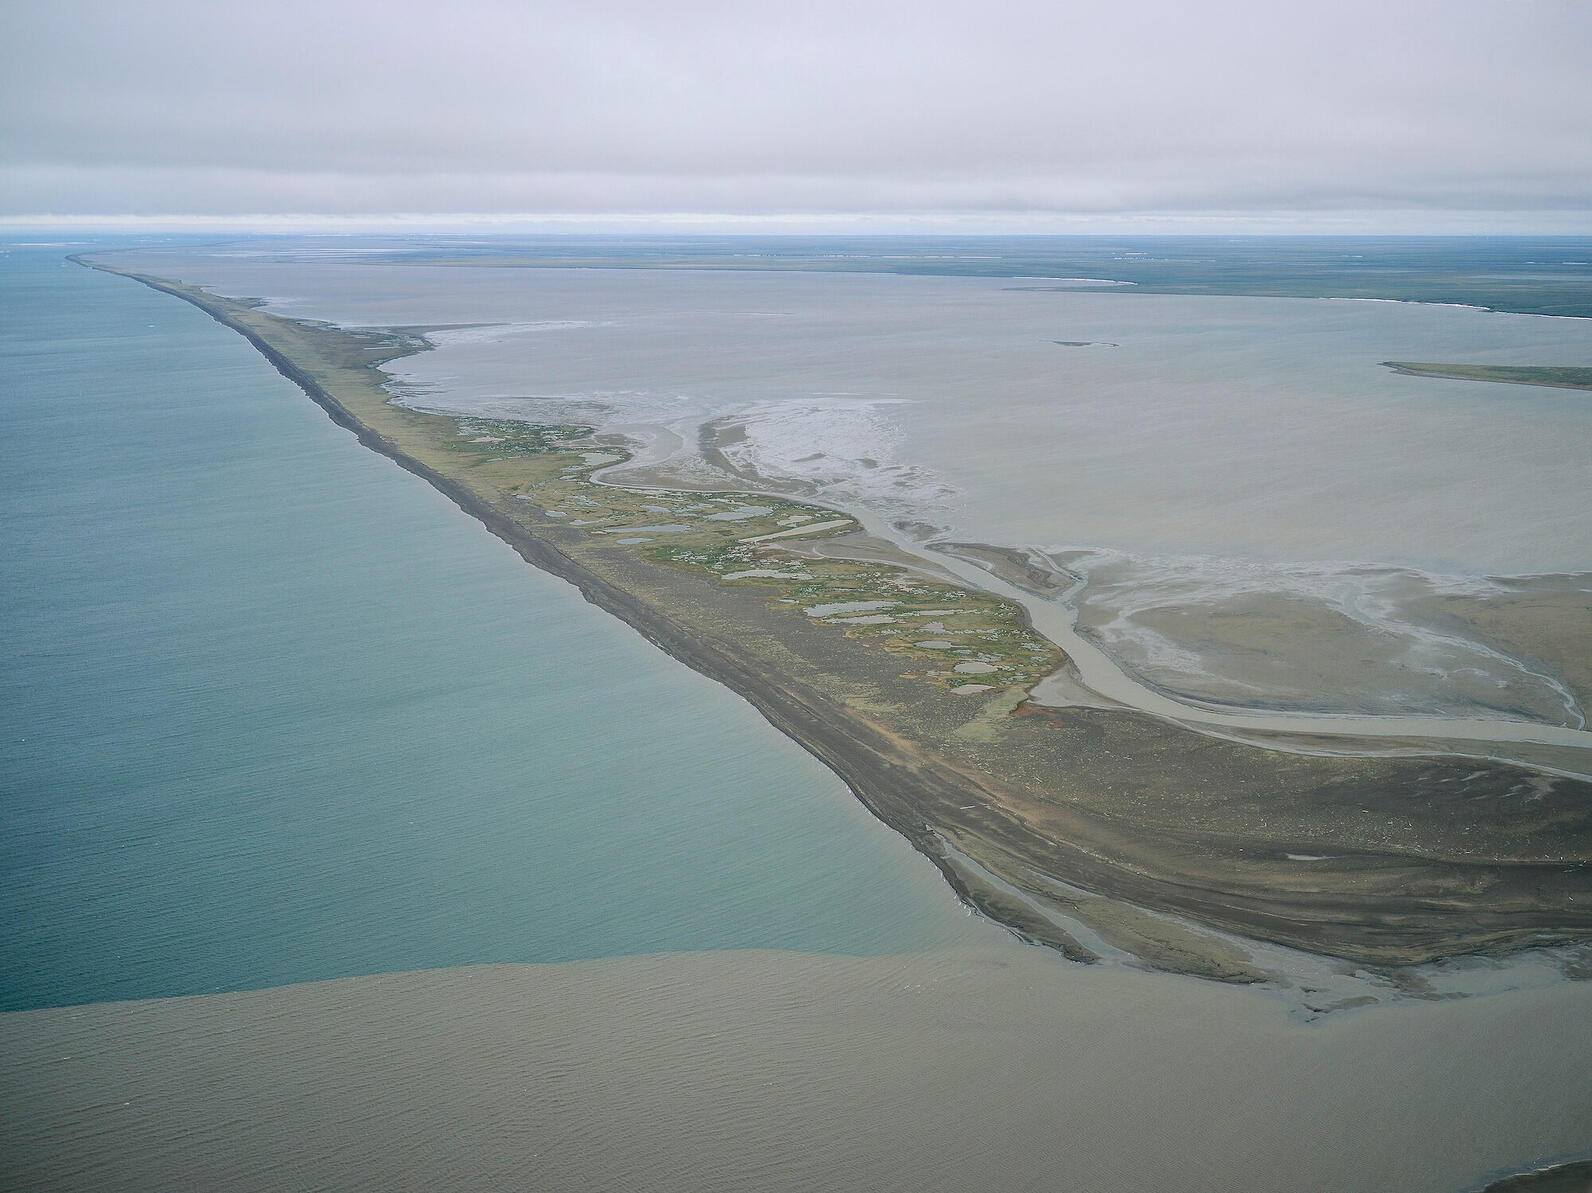 Water and barrier islands